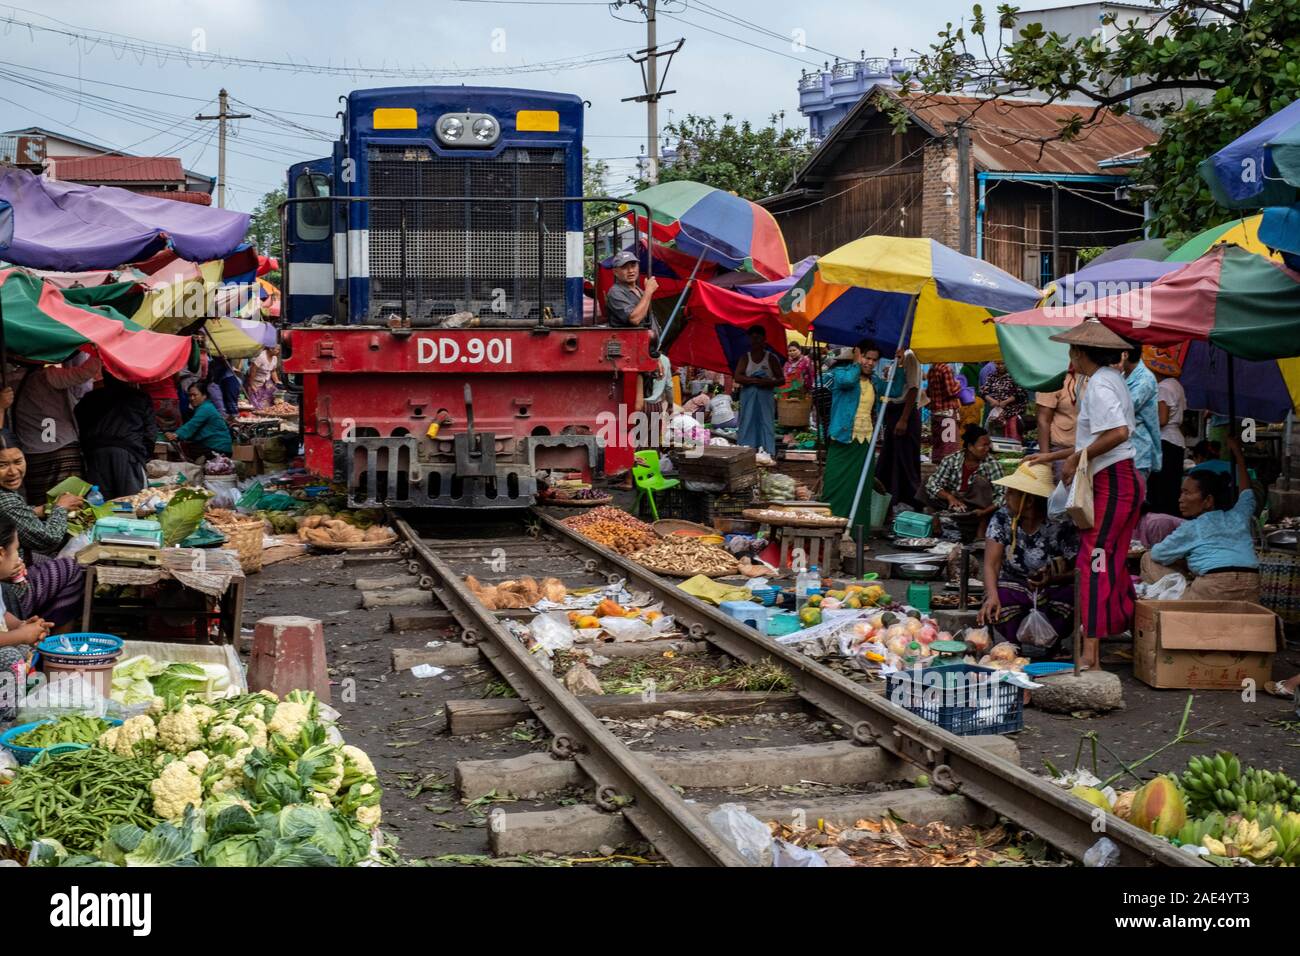 The railroad marketplace on the tracks of a local railroad with mobile market stalls, vendors and umbrellas in Mandalay, Myanmar (Burma) Stock Photo